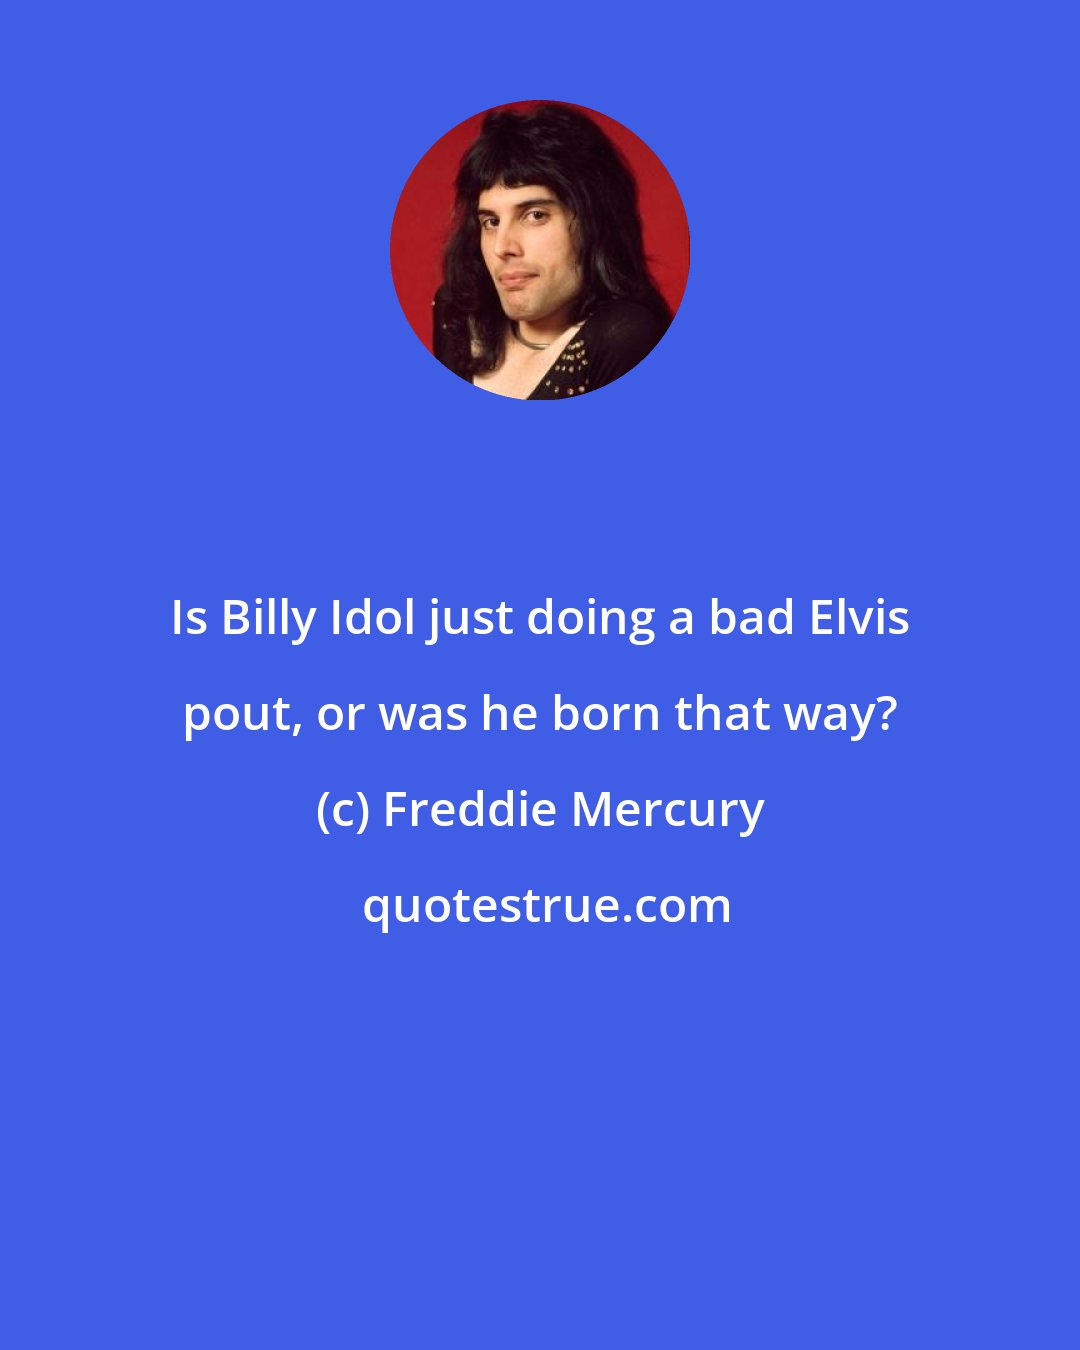 Freddie Mercury: Is Billy Idol just doing a bad Elvis pout, or was he born that way?